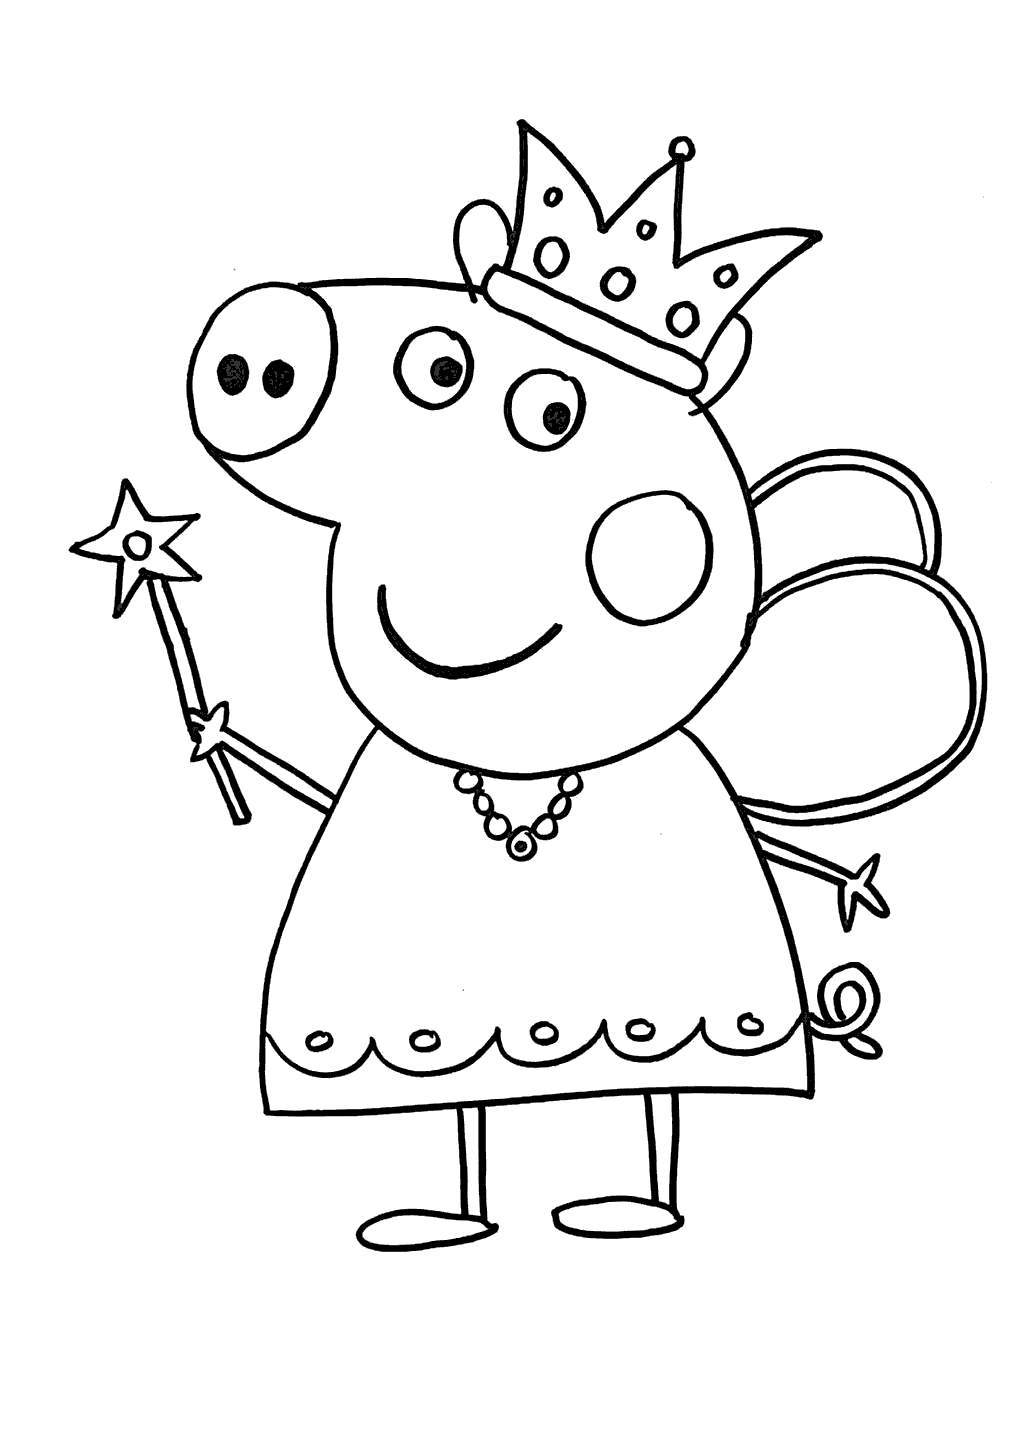 Free Peppa Pig Coloring Pages Coloring Activity printable